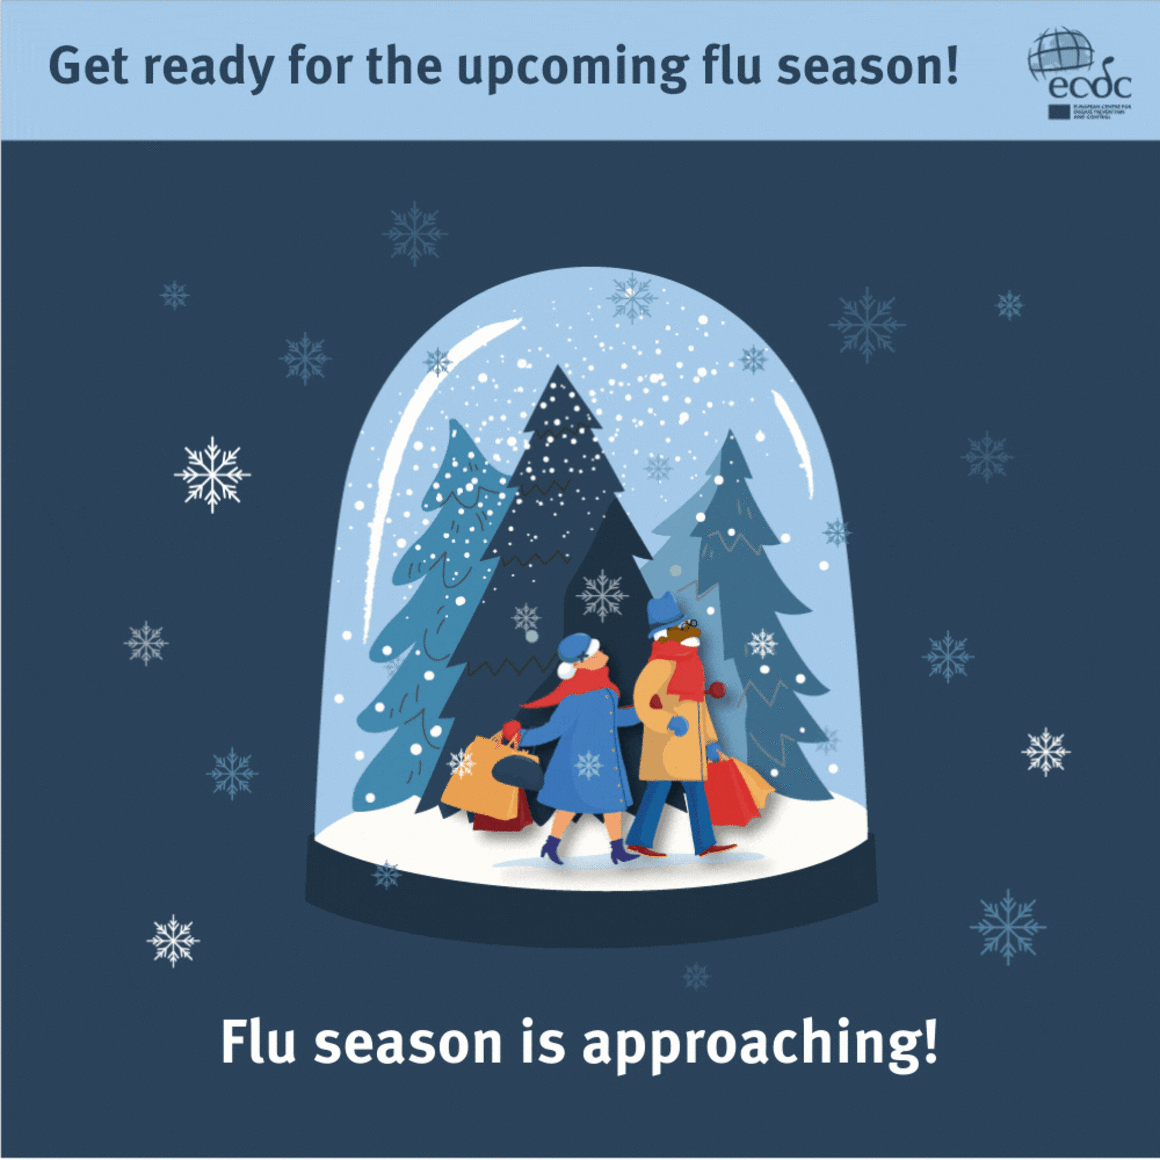 Get ready for the upcoming flu season!